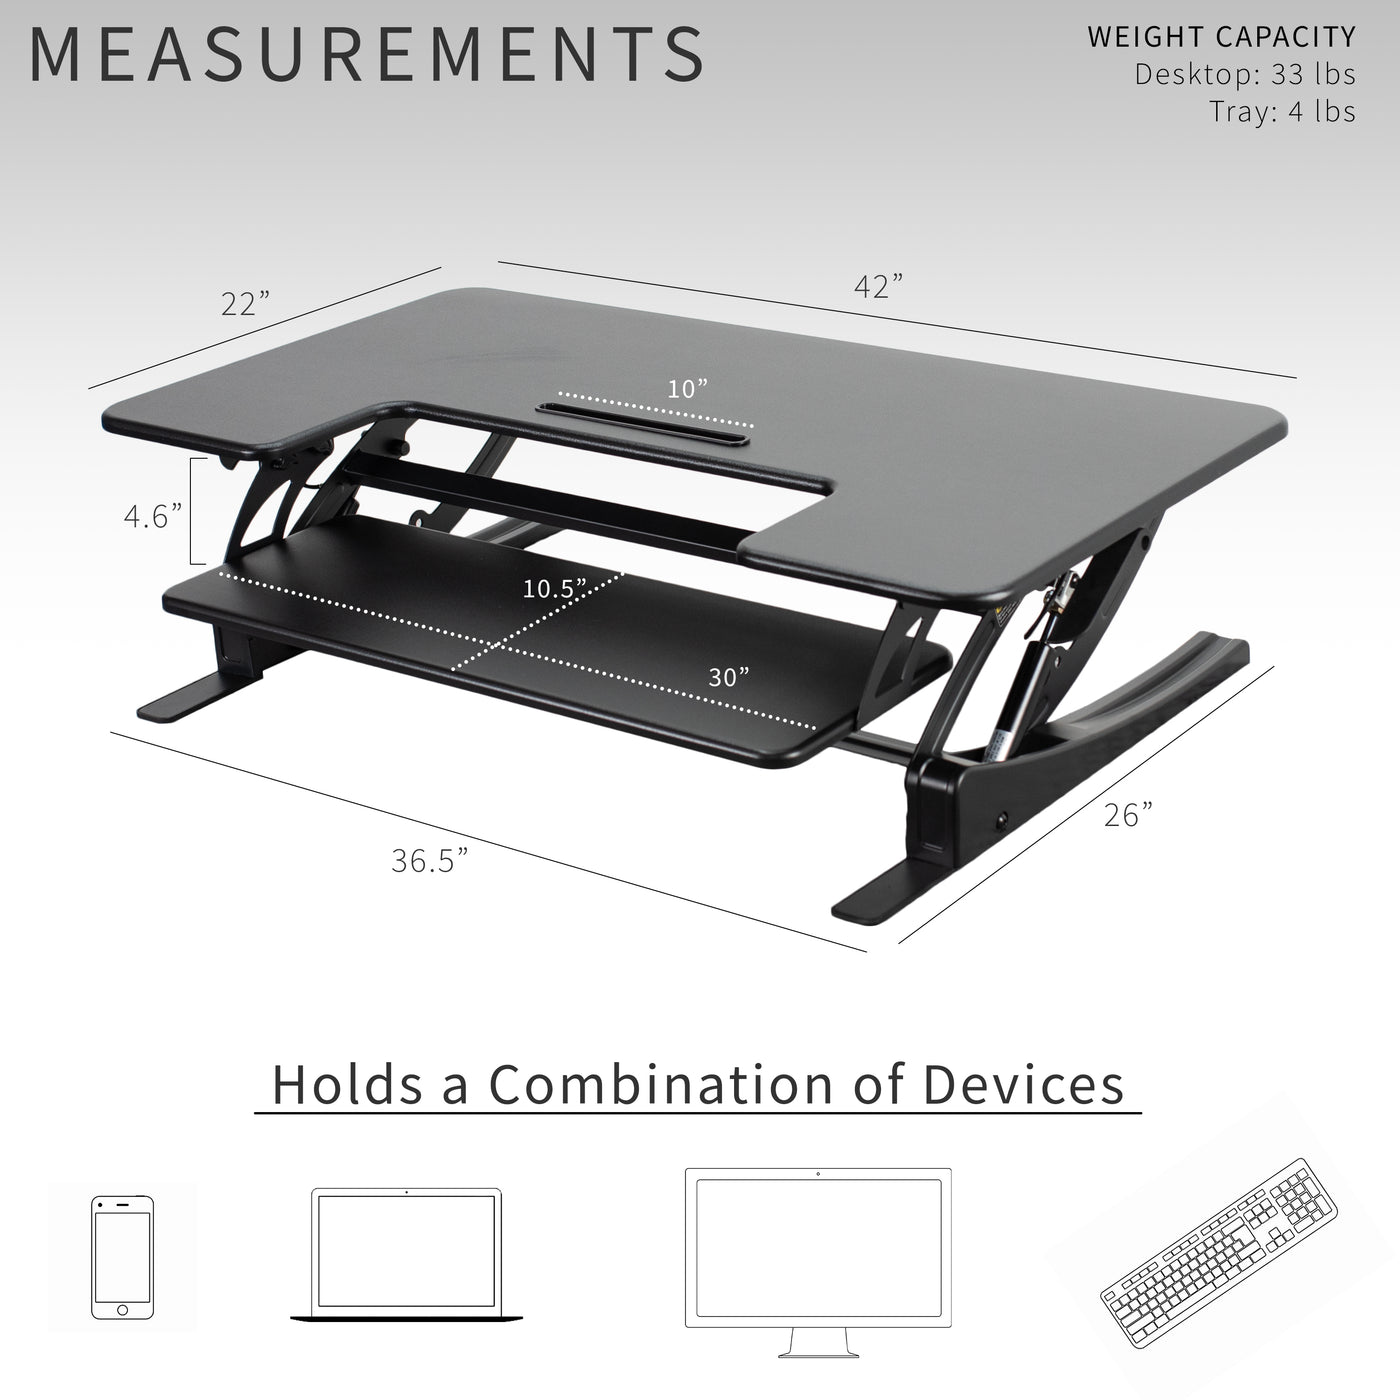 Desk converter capable of holding a variety of combinations of devices.